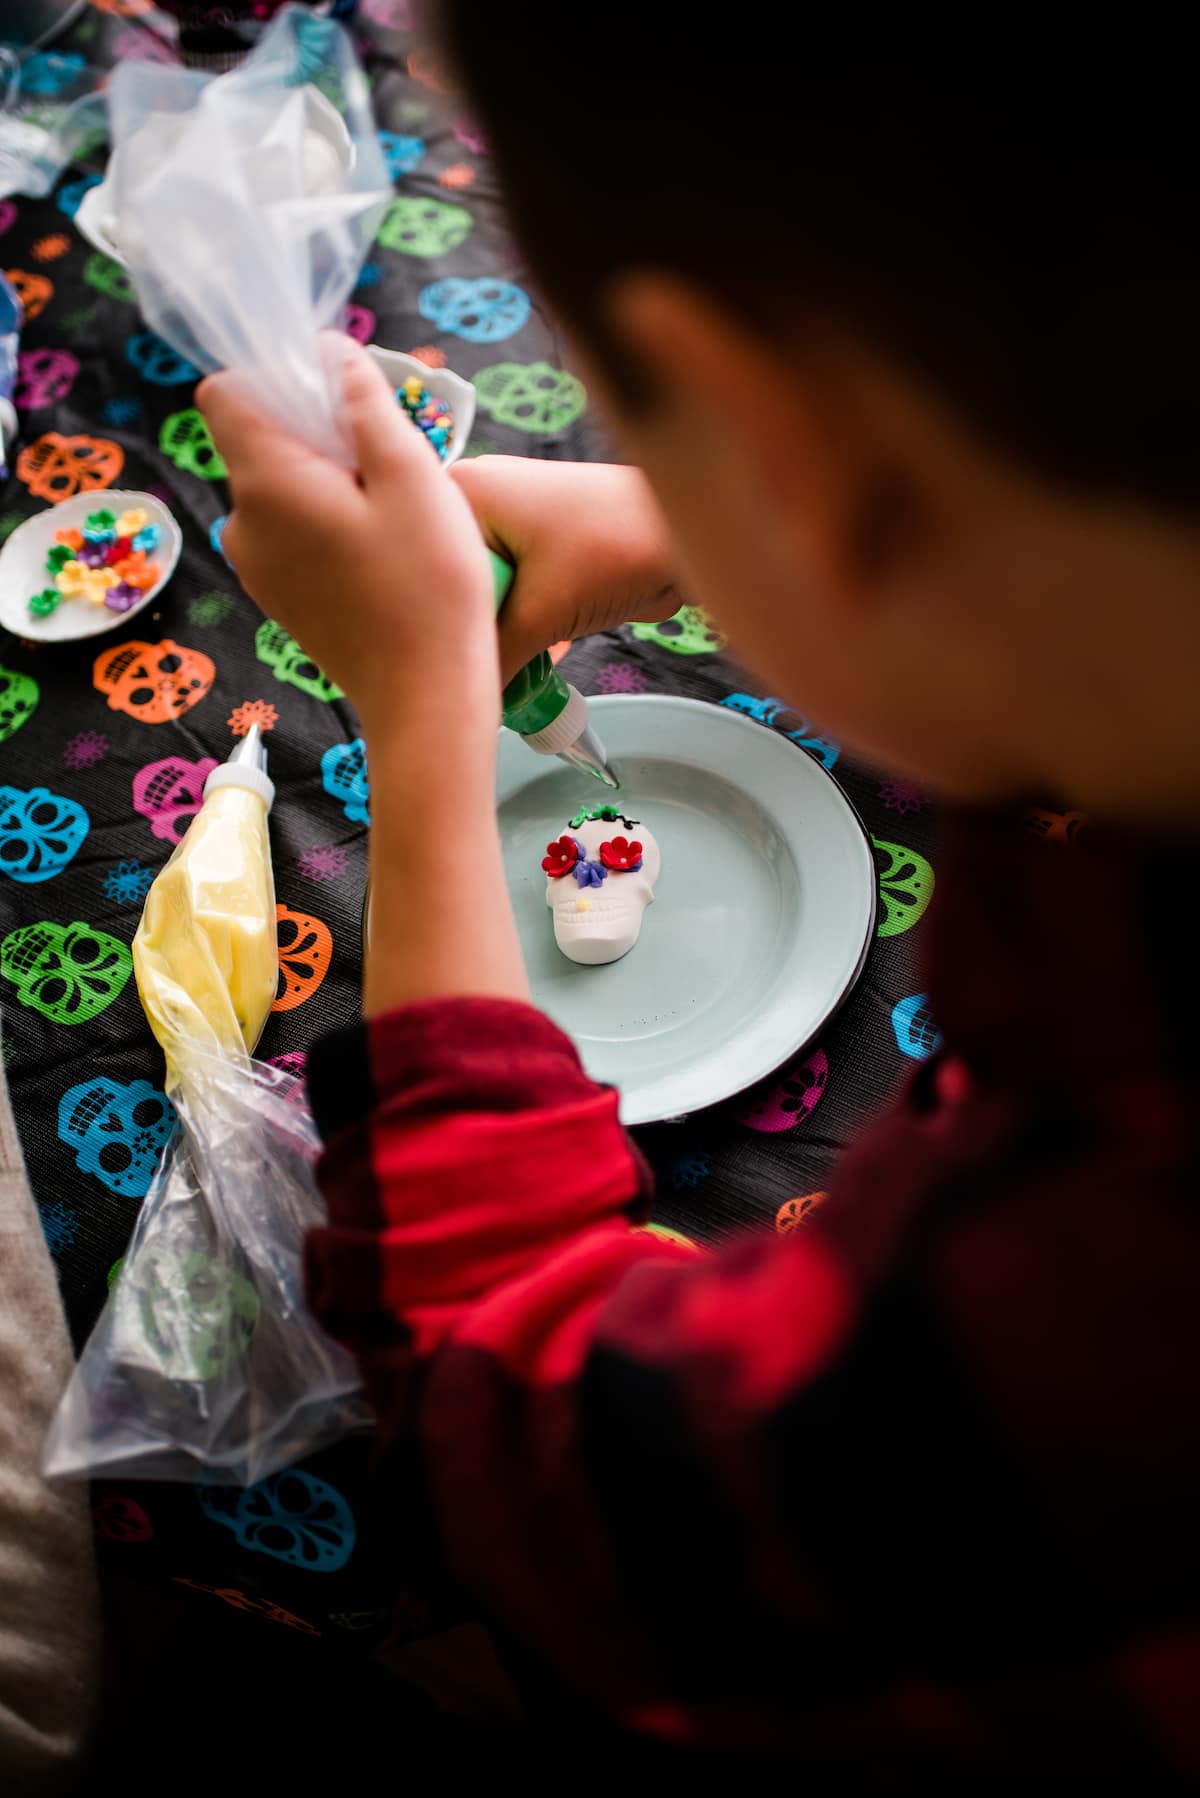 An overhead shot of a young boy decorating his Dia de los Muertos candy skulls with colorful frosting, candy flowers, and sprinkles on top of a colorful skull tablecloth 